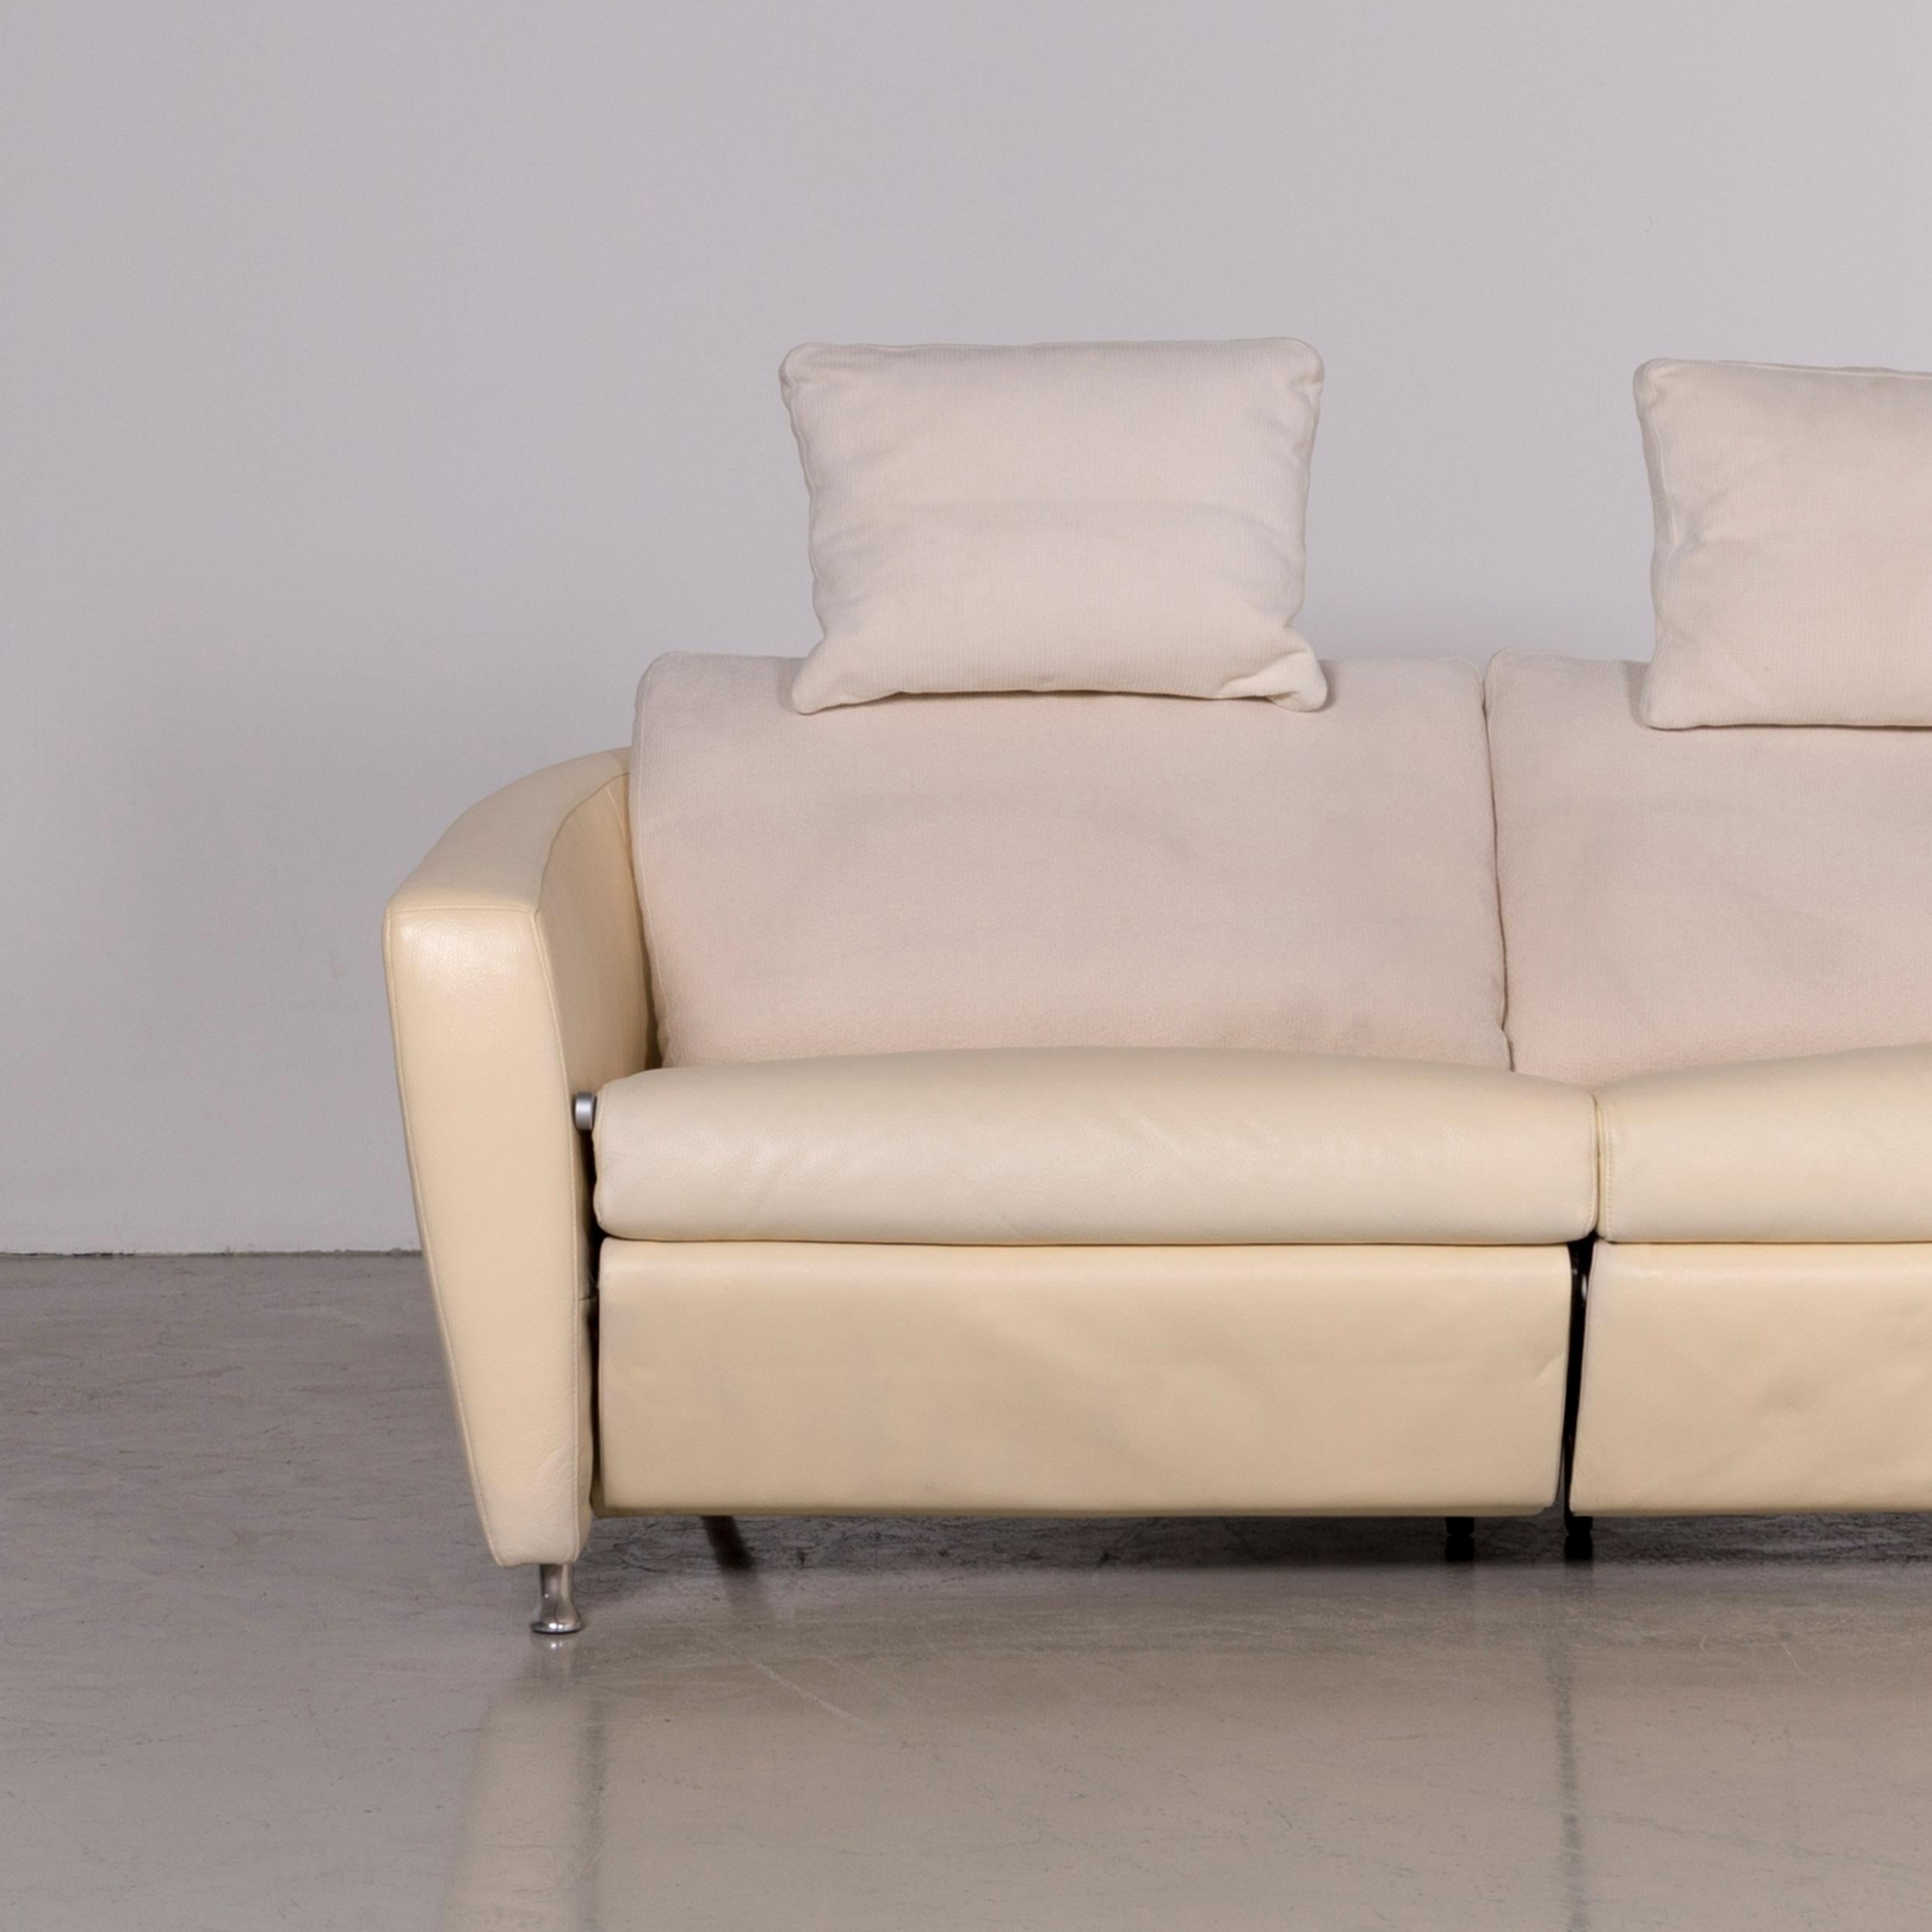 FSM Sesam Leather Sofa Off-White Two-Seat Function In Good Condition For Sale In Cologne, DE